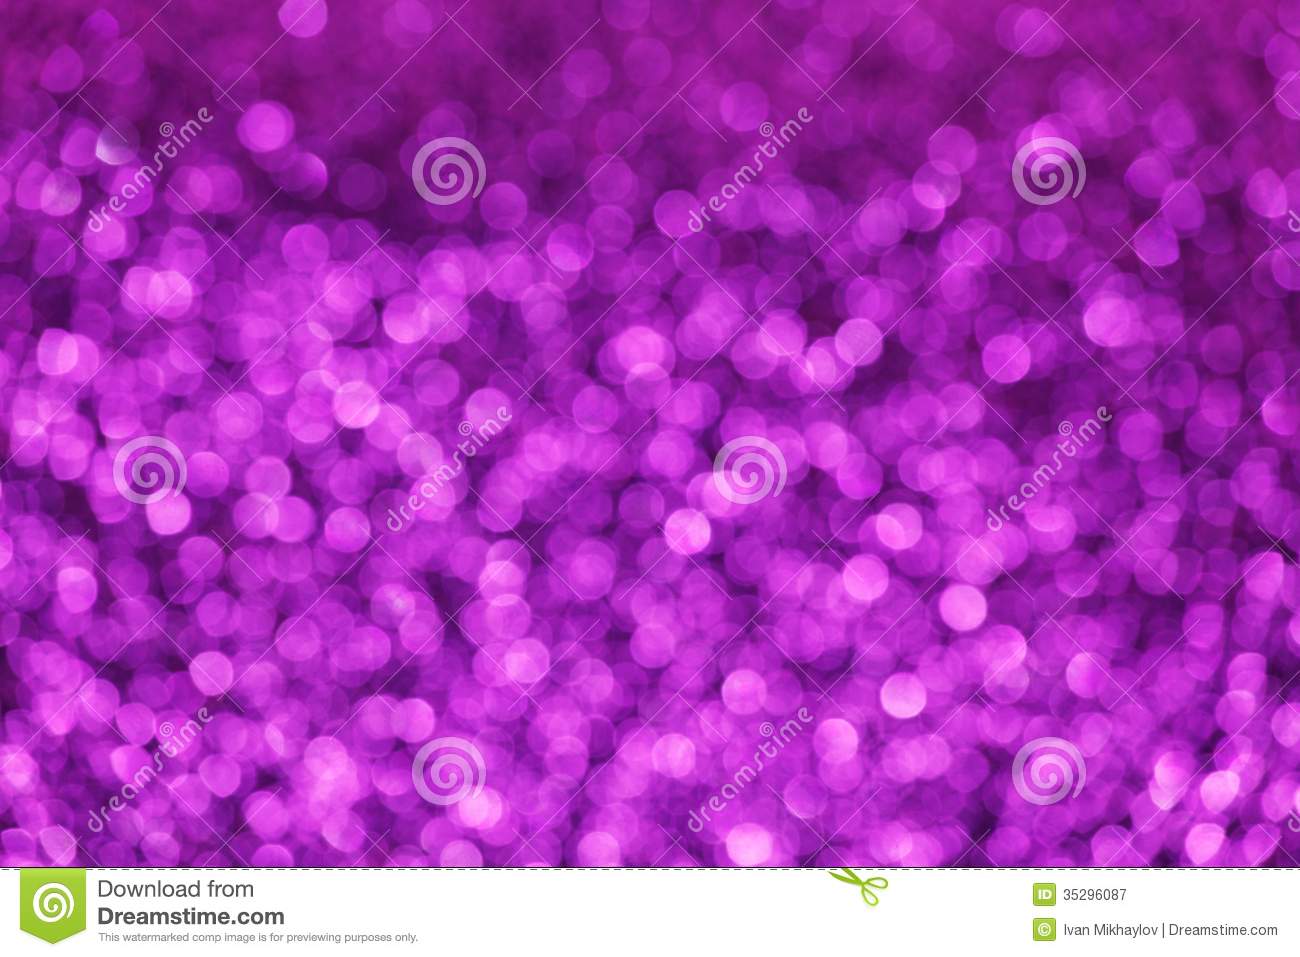 Purple Glitter Wallpaper   HD Wallpapers and Pictures